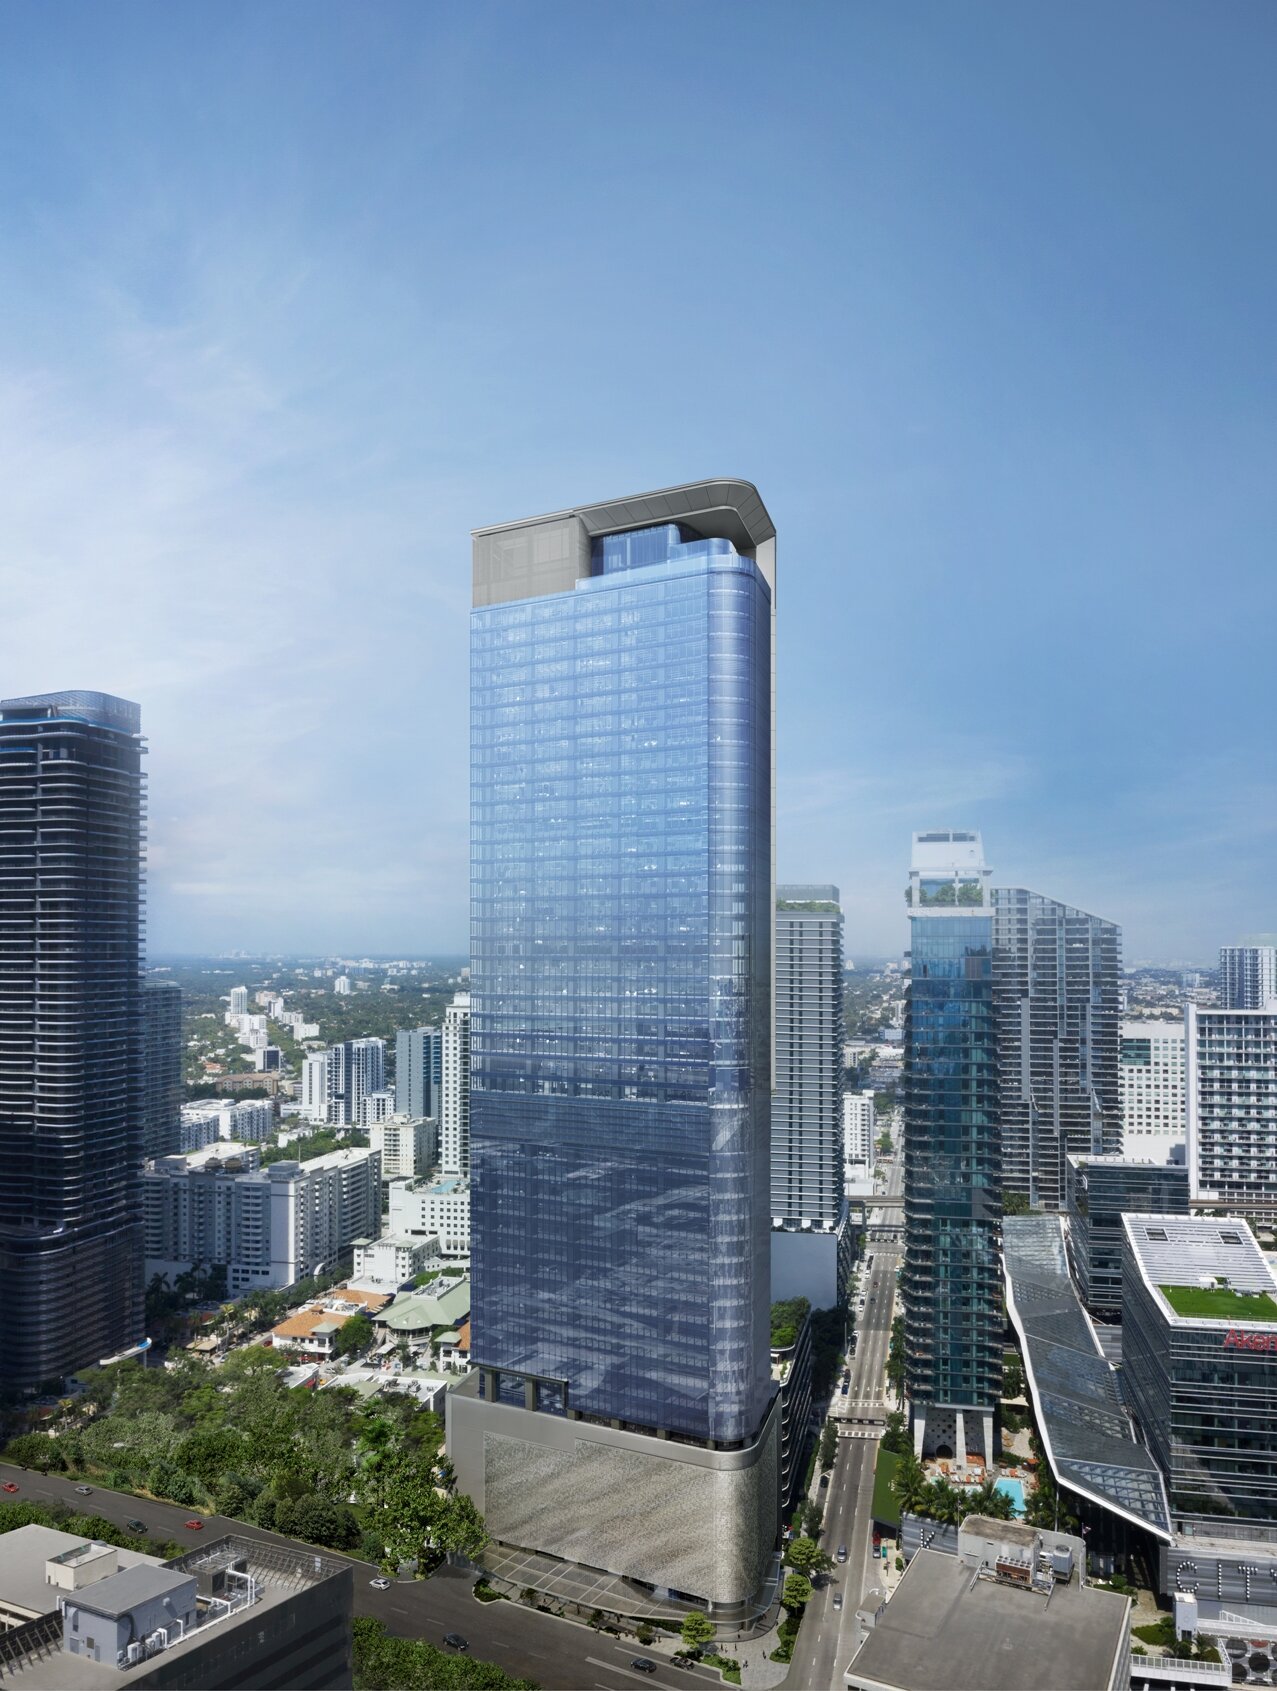 Global Financial Services Firm Rothschild To Open Miami Office At 830 Brickell2.jpeg